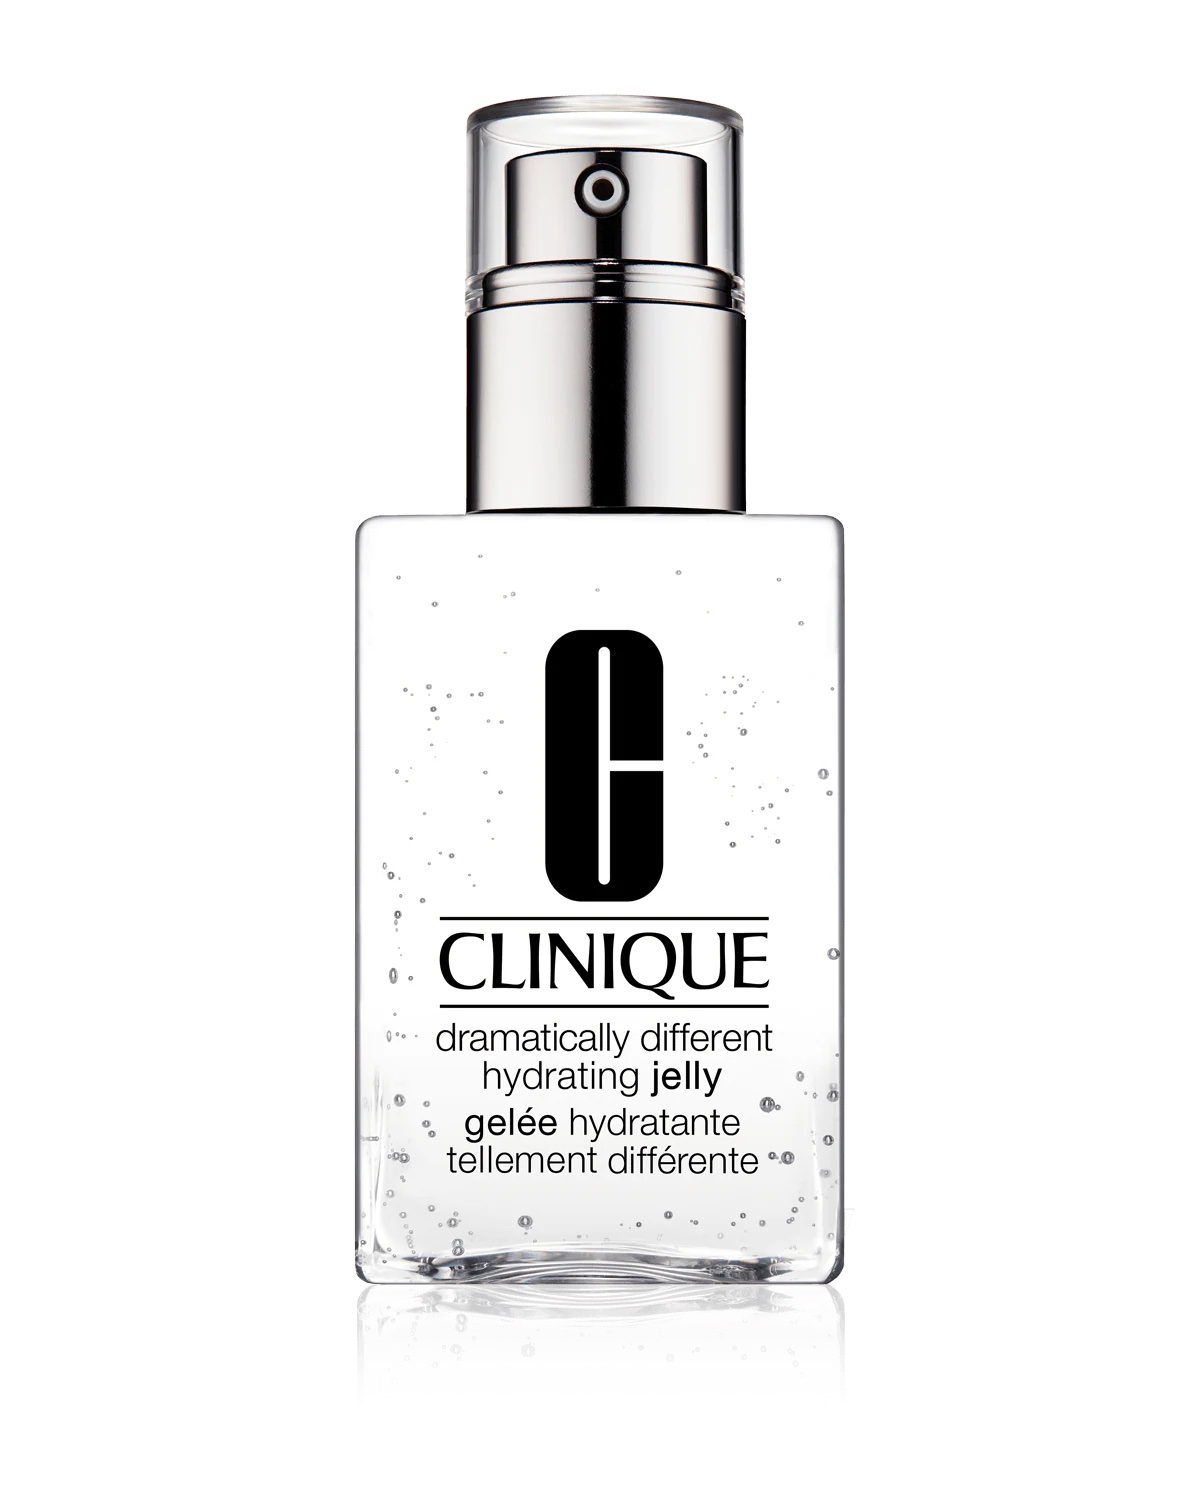 https://www.clinique.com/product/1574/58208/3-step/step-3-moisturize/dramatically-differenttm-hydrating-jelly